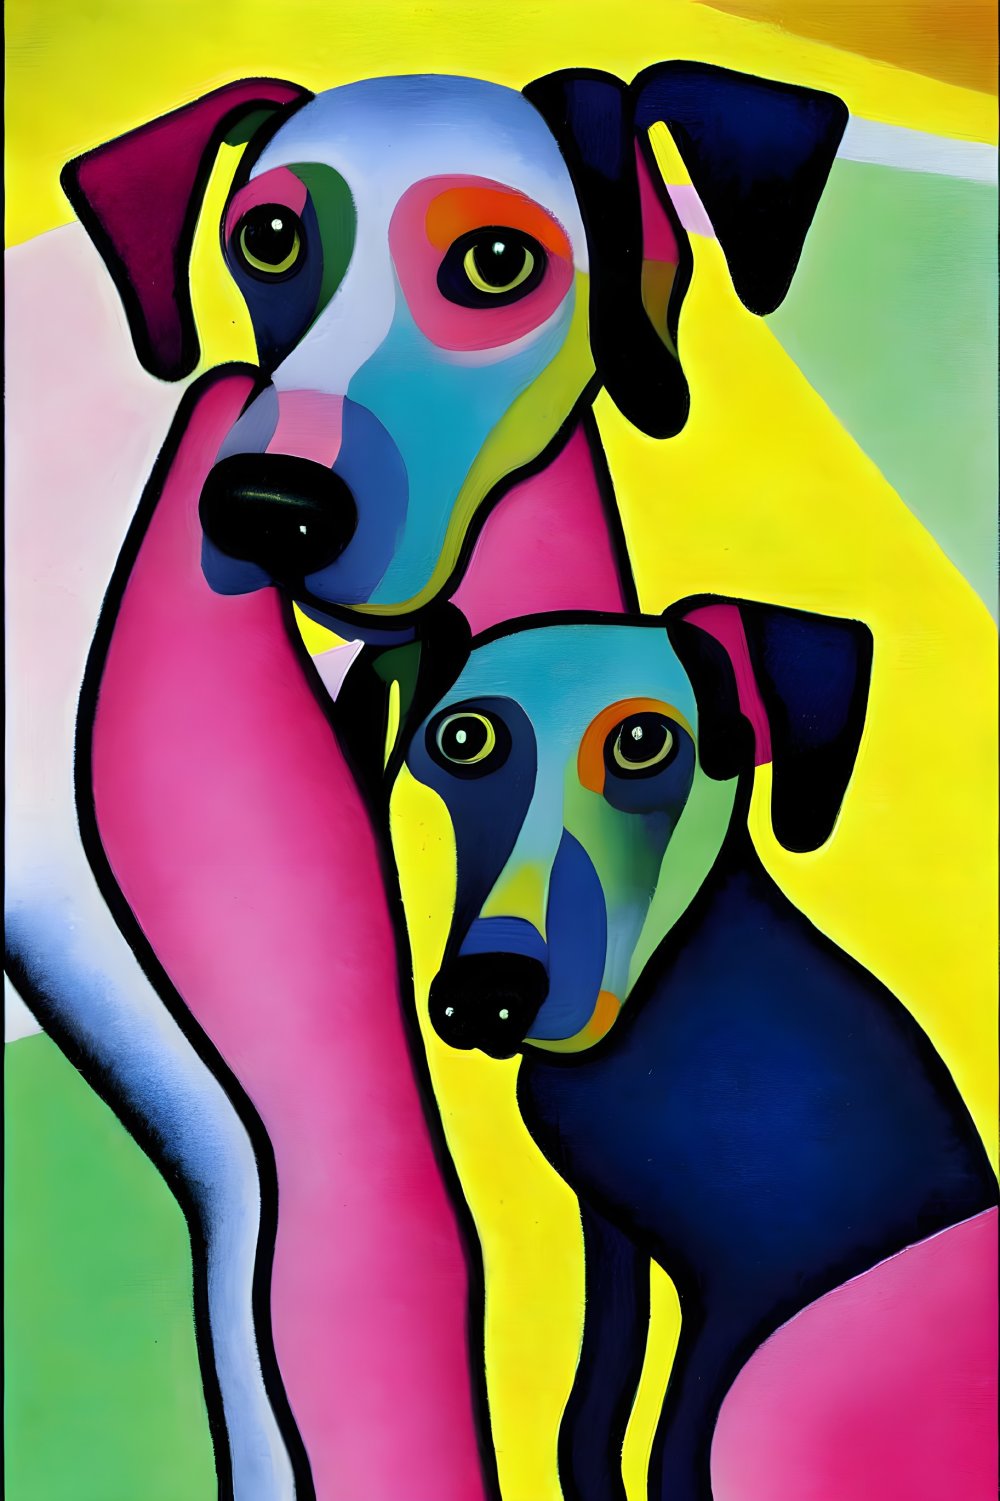 Colorful Stylized Dogs on Vibrant Yellow Background